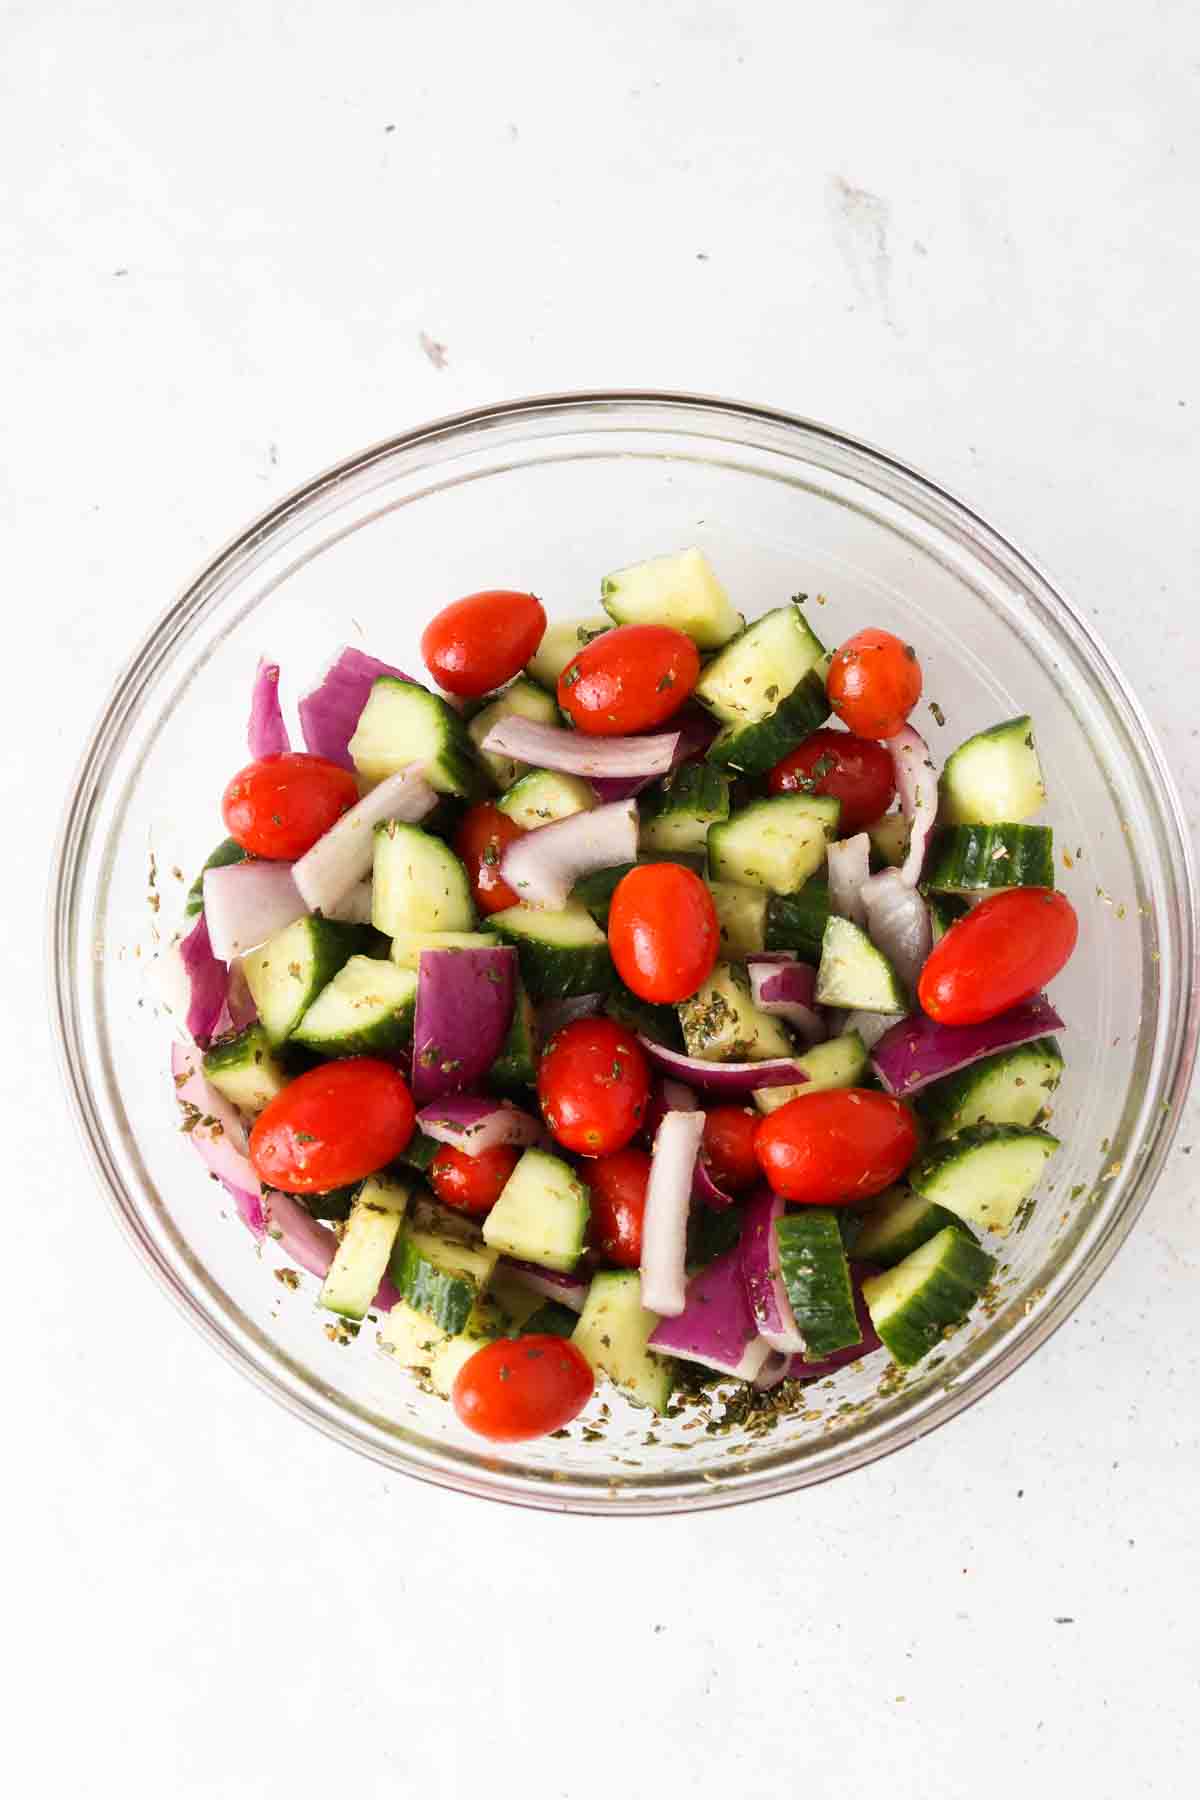 Greek salad ingredients in a bowl mixed together.